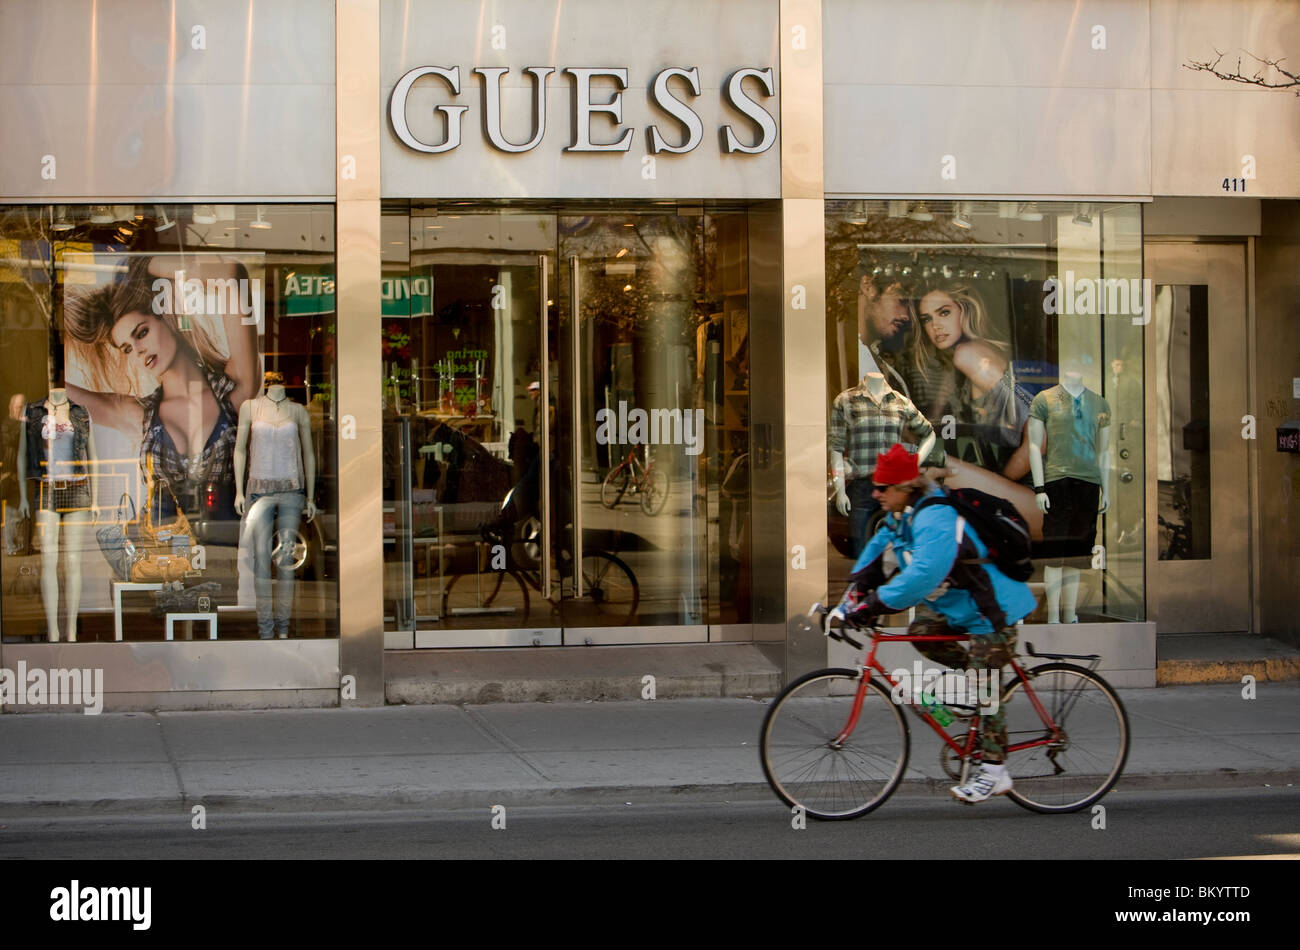 Guess Shop High Resolution Stock Photography and Images - Alamy